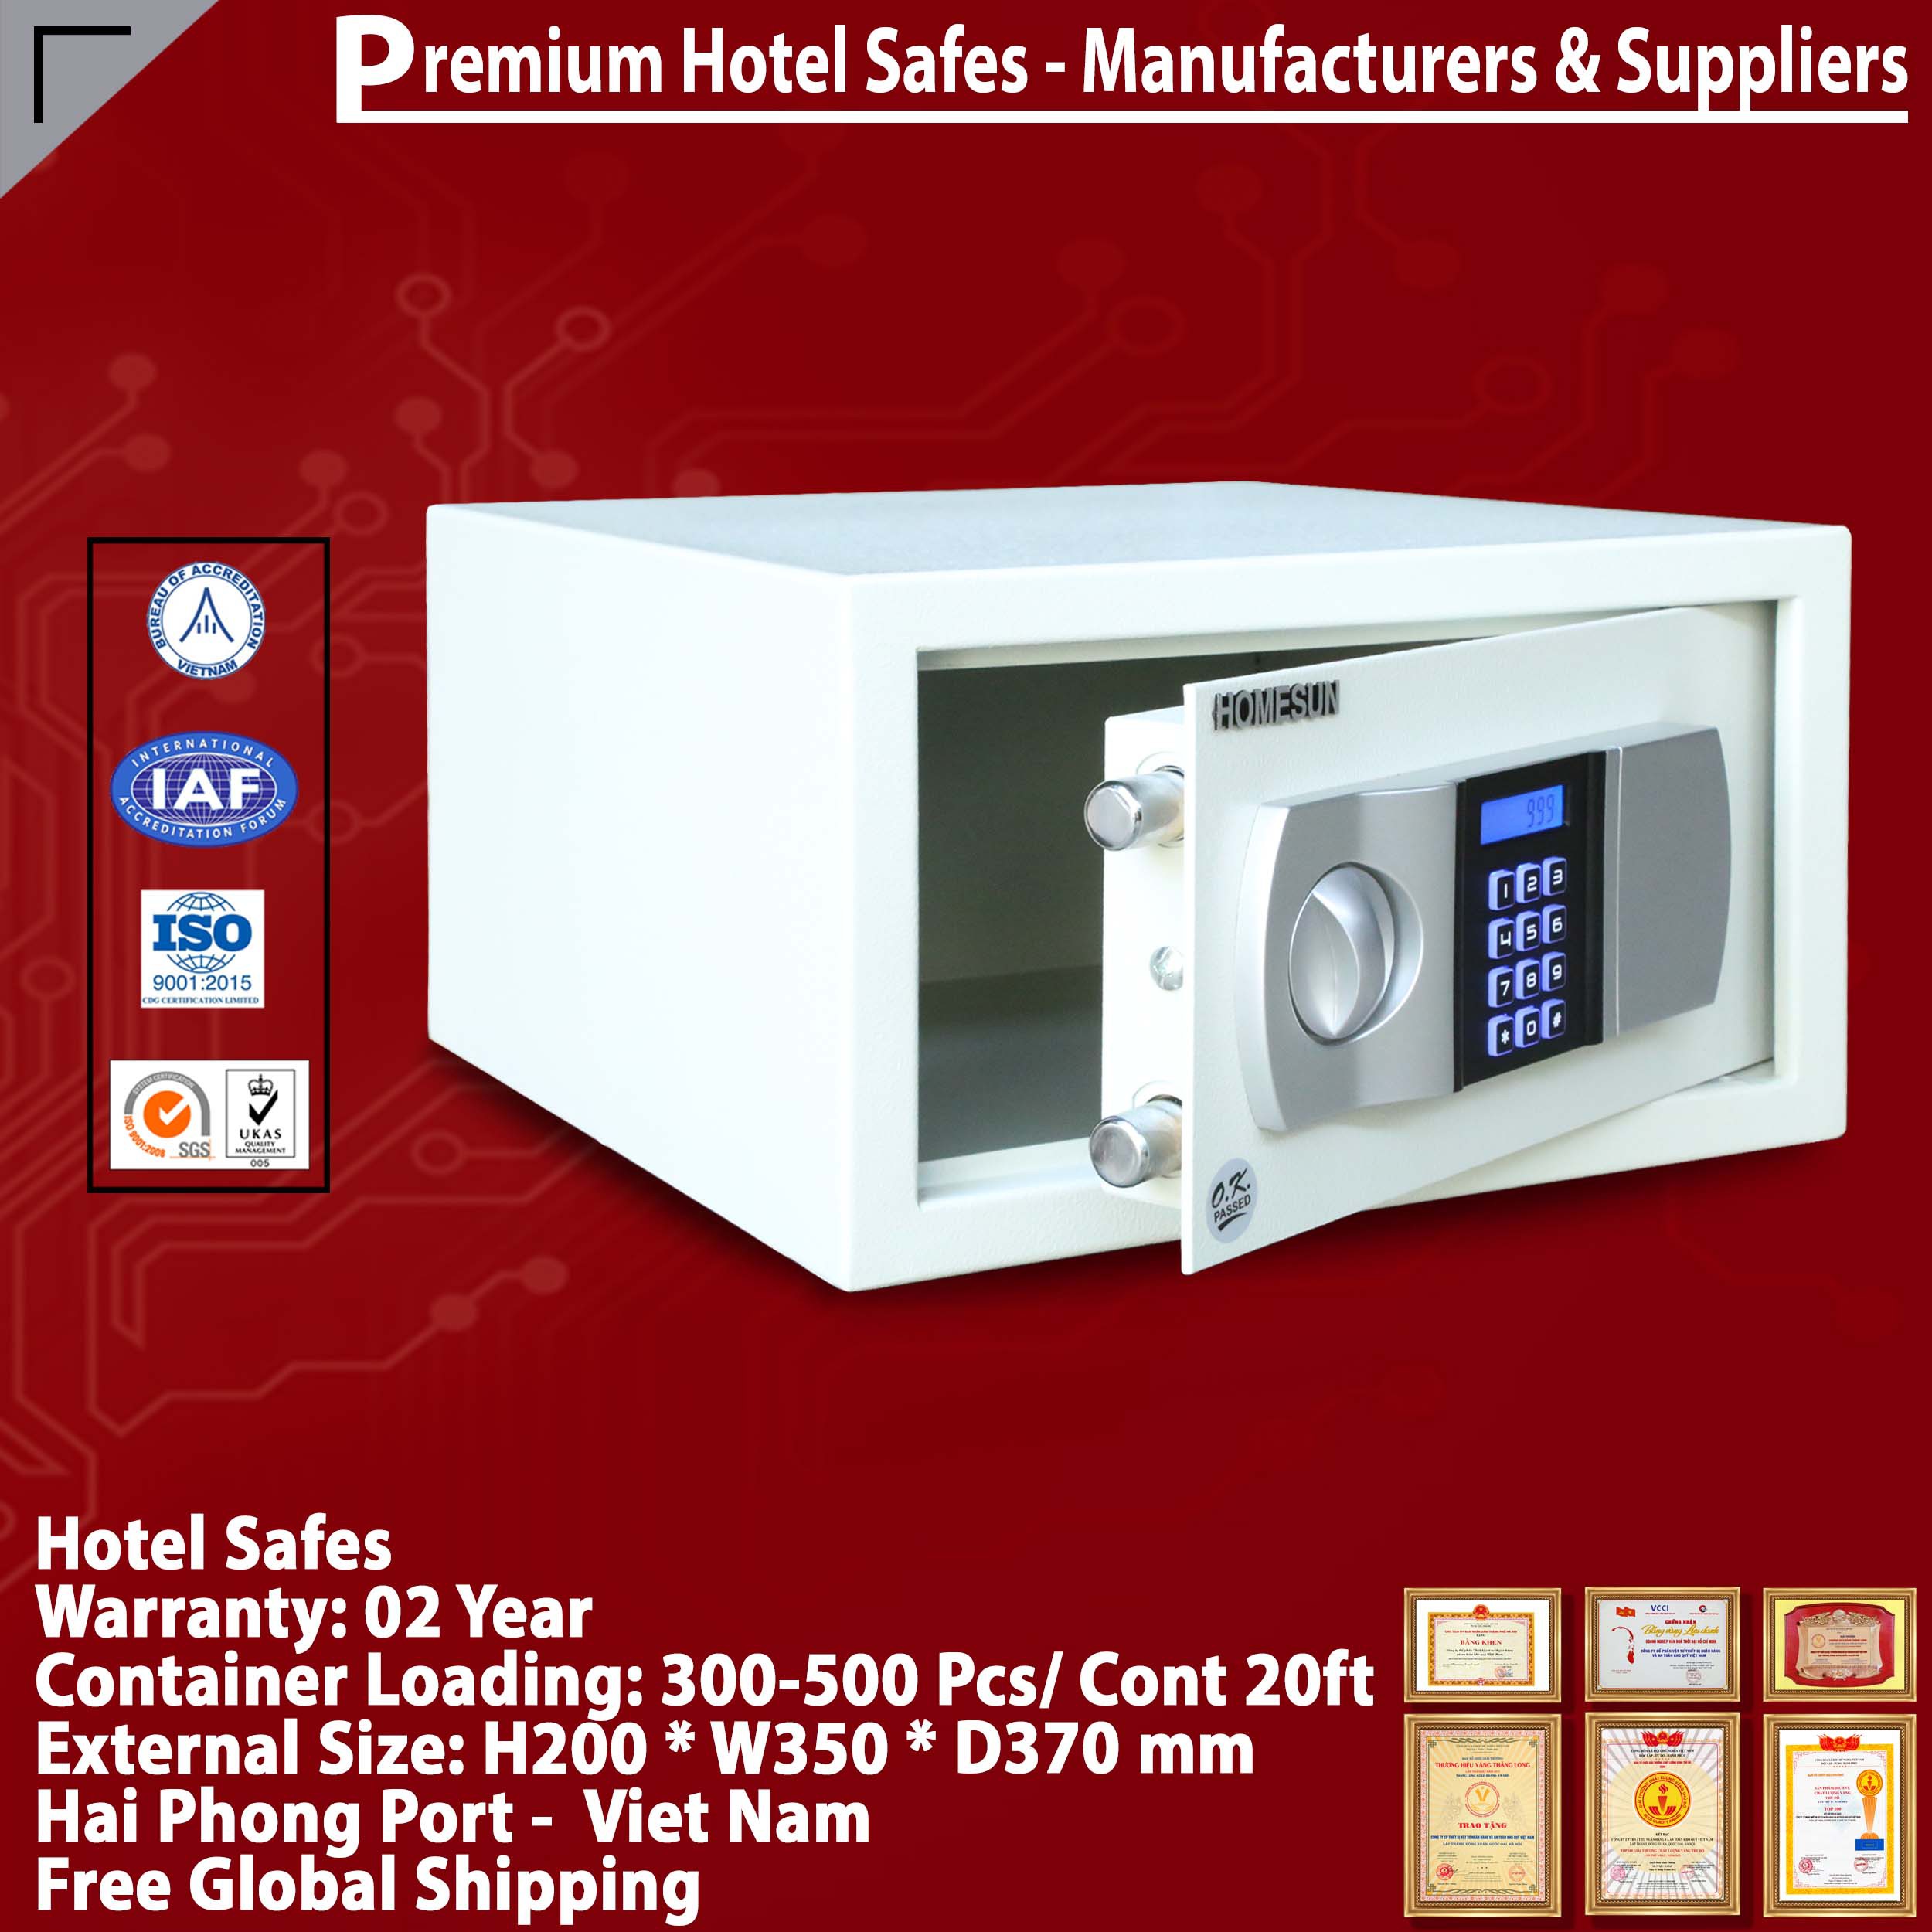 Best Sellers In Hotel Safes High Quality Price Ratio‎ for sale online